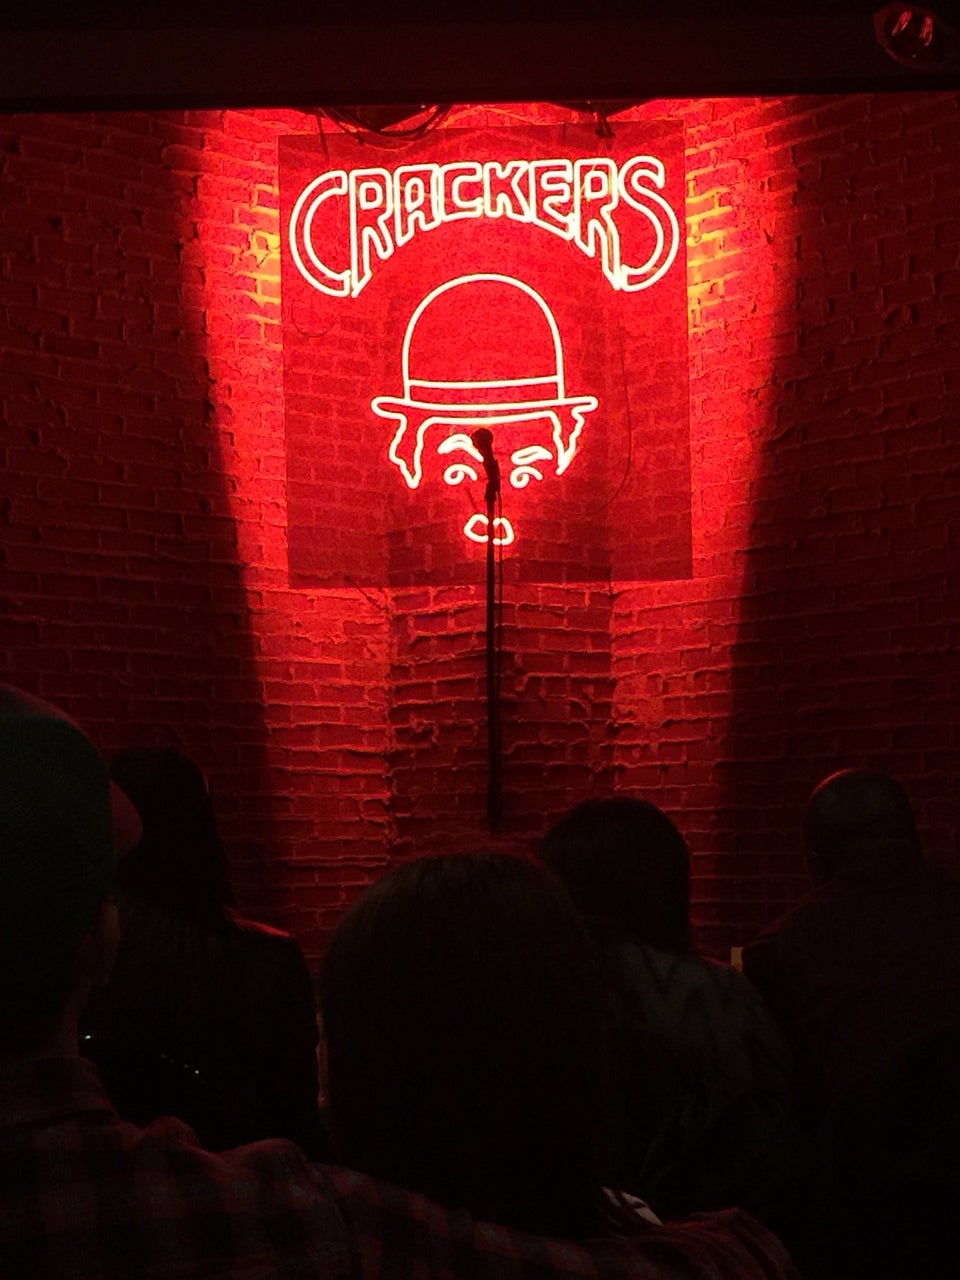 Photo of Crackers Comedy Club